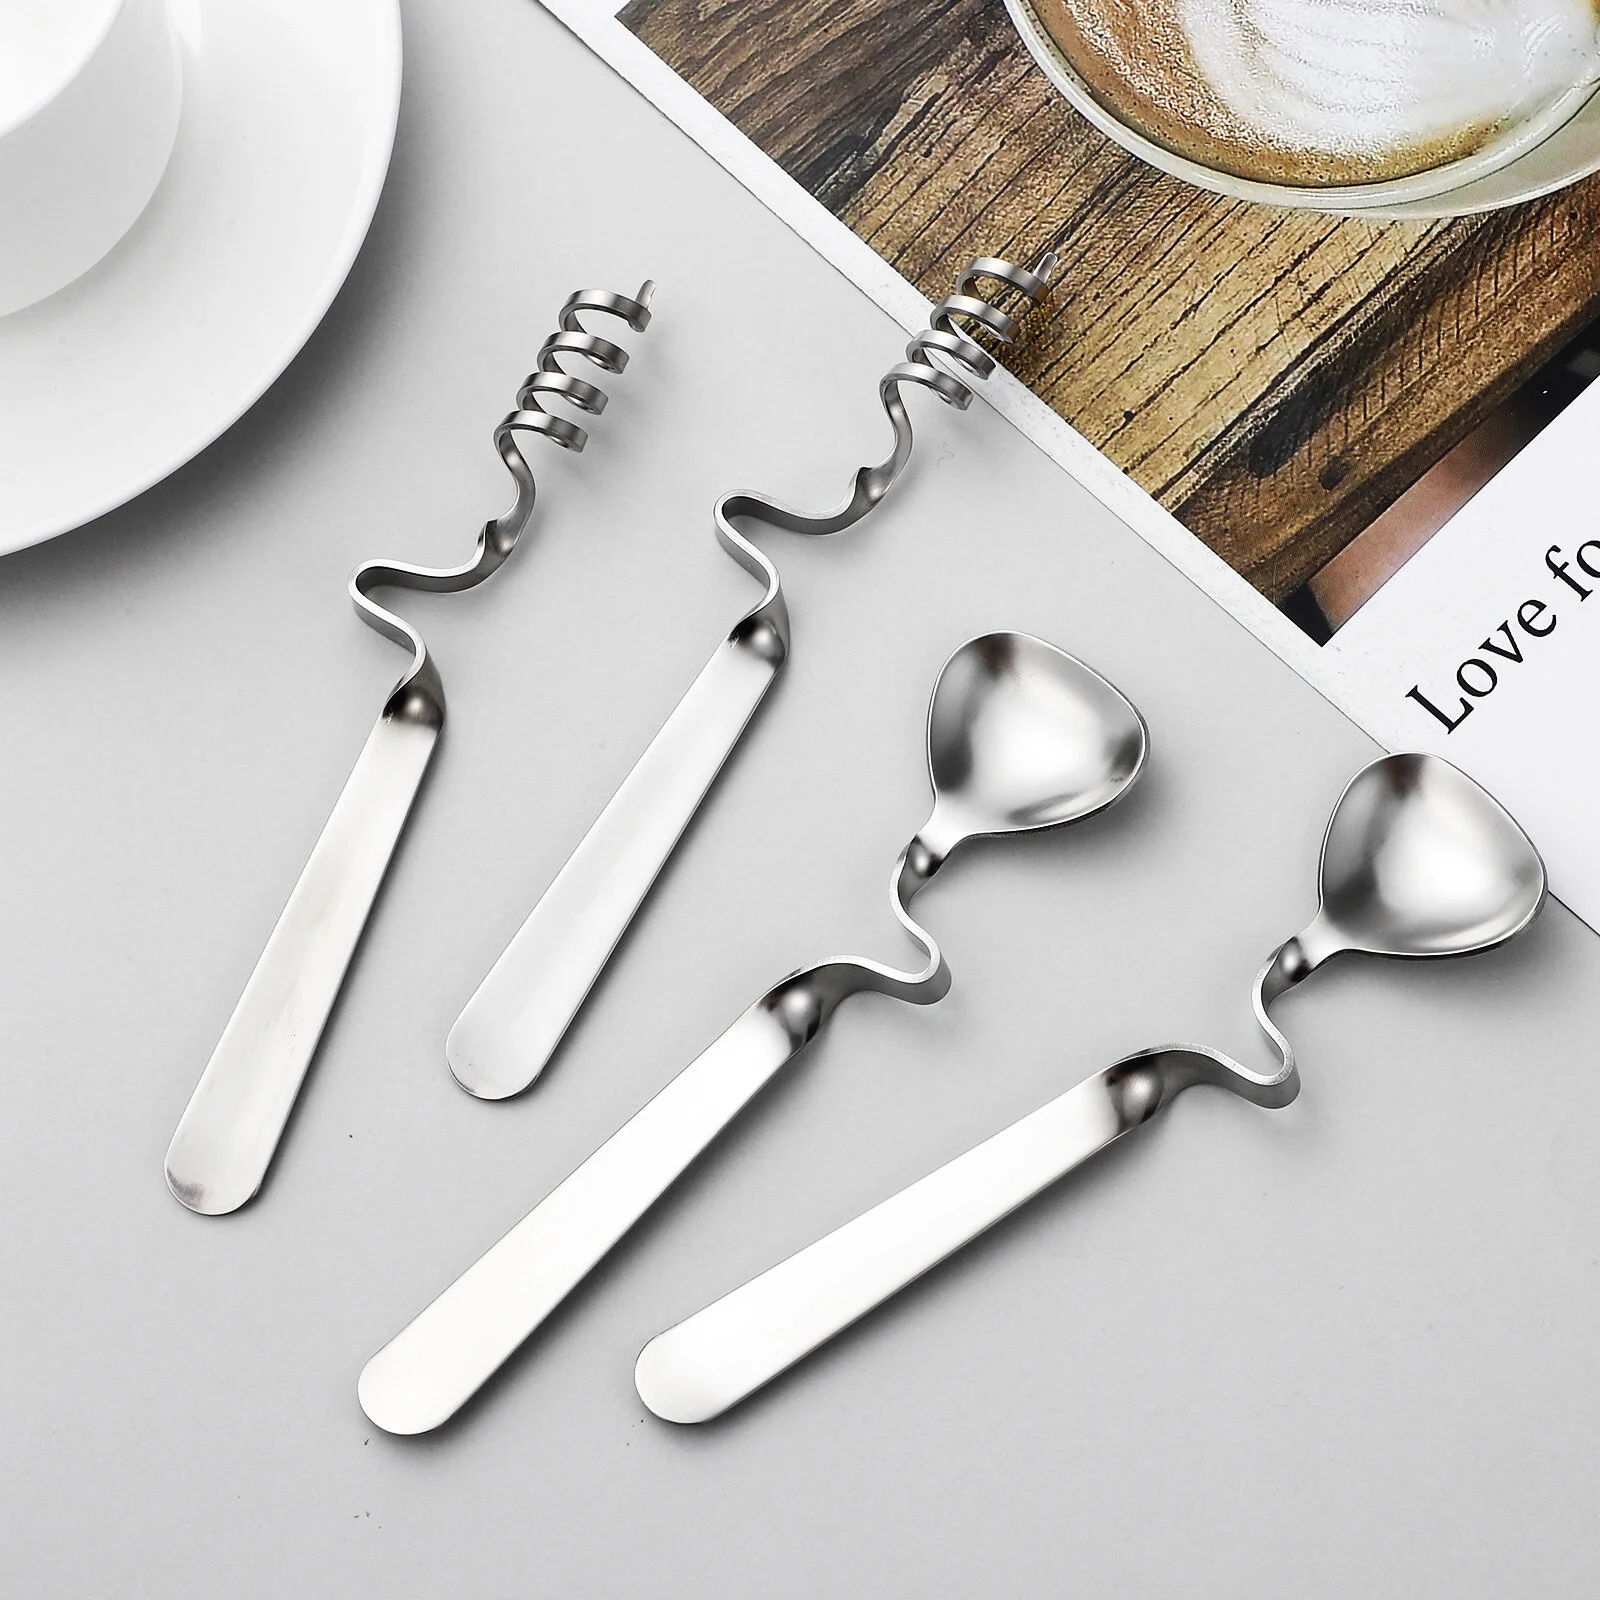 

4 Pcs Espresso Spoons Stainless Steel Coffee Spoons Honey Spoons Stir Spoons with Curved Handle